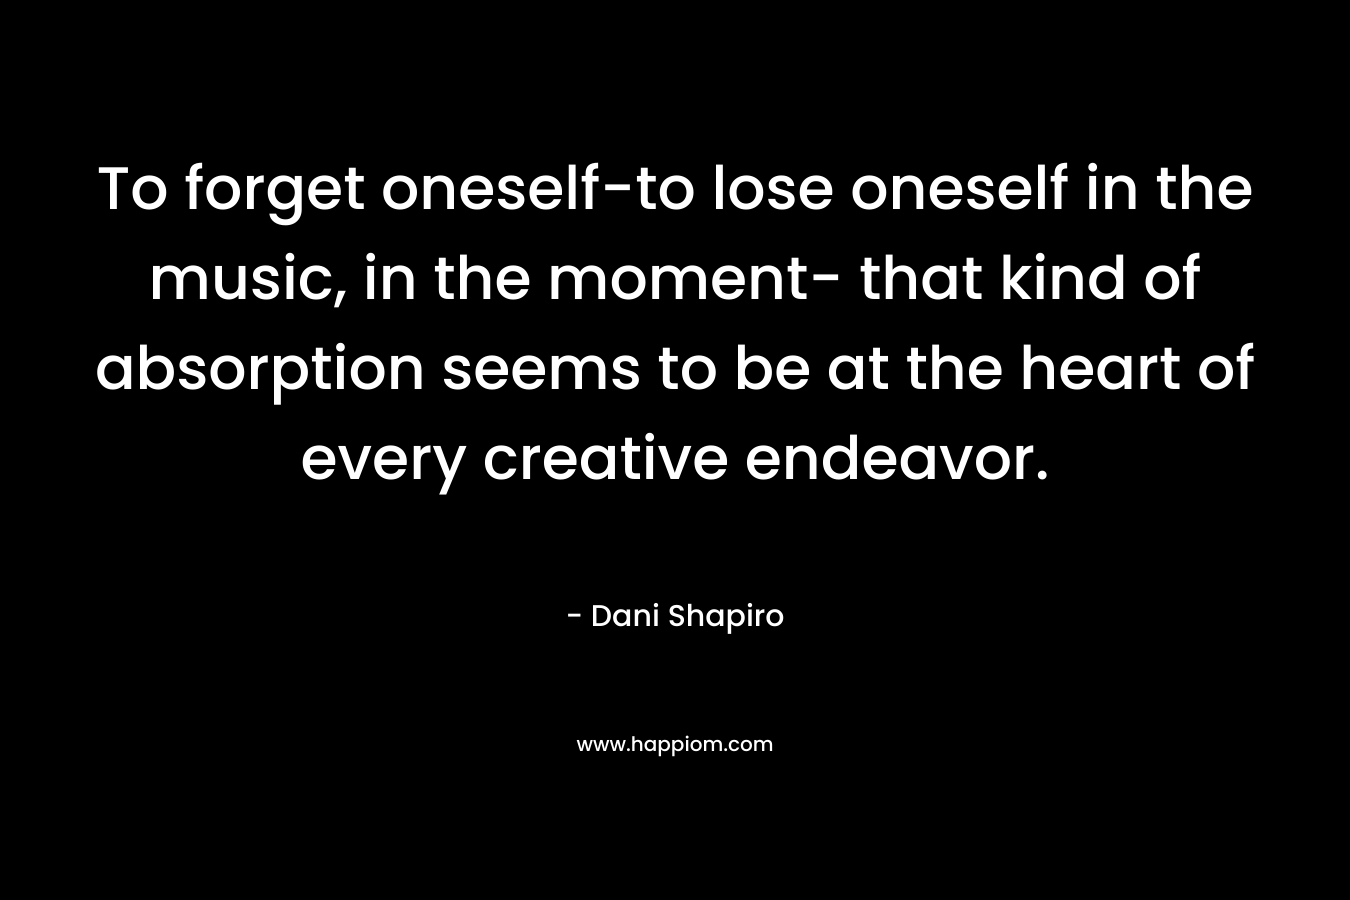 To forget oneself-to lose oneself in the music, in the moment- that kind of absorption seems to be at the heart of every creative endeavor.